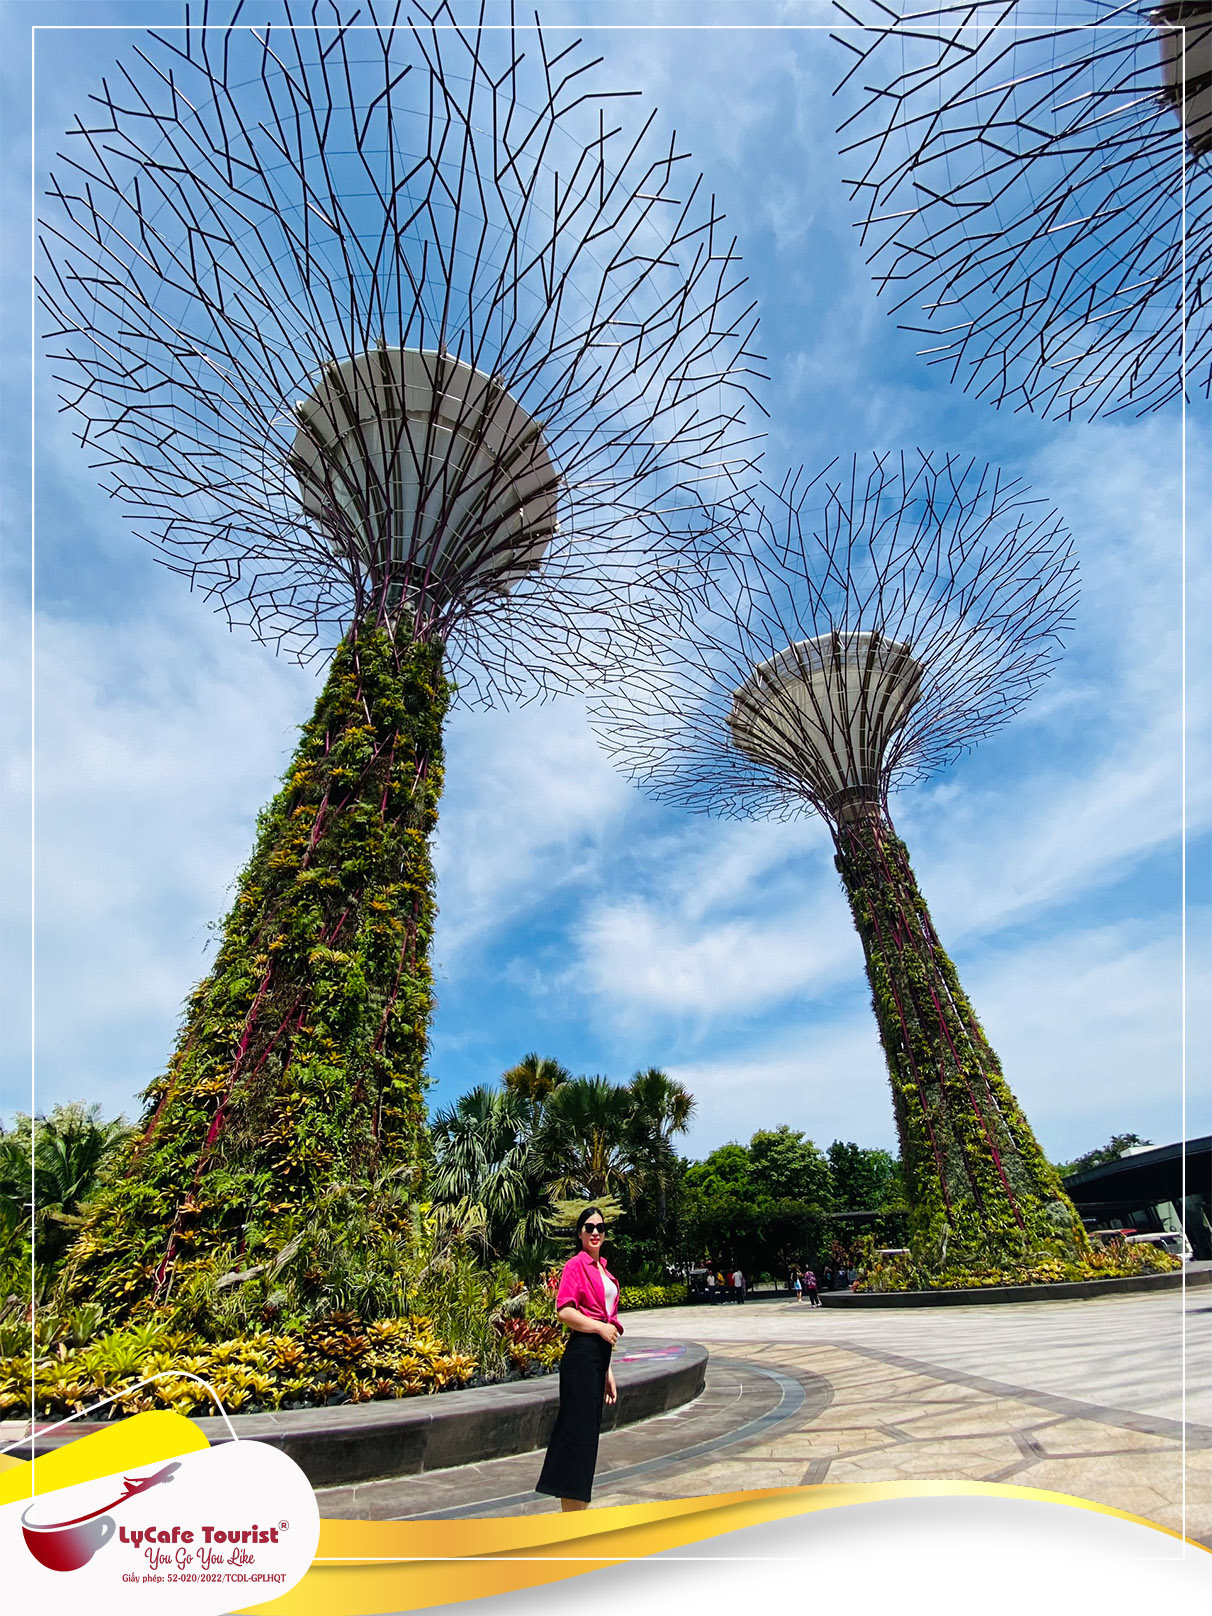 (Gardens by the Bay) - singapore